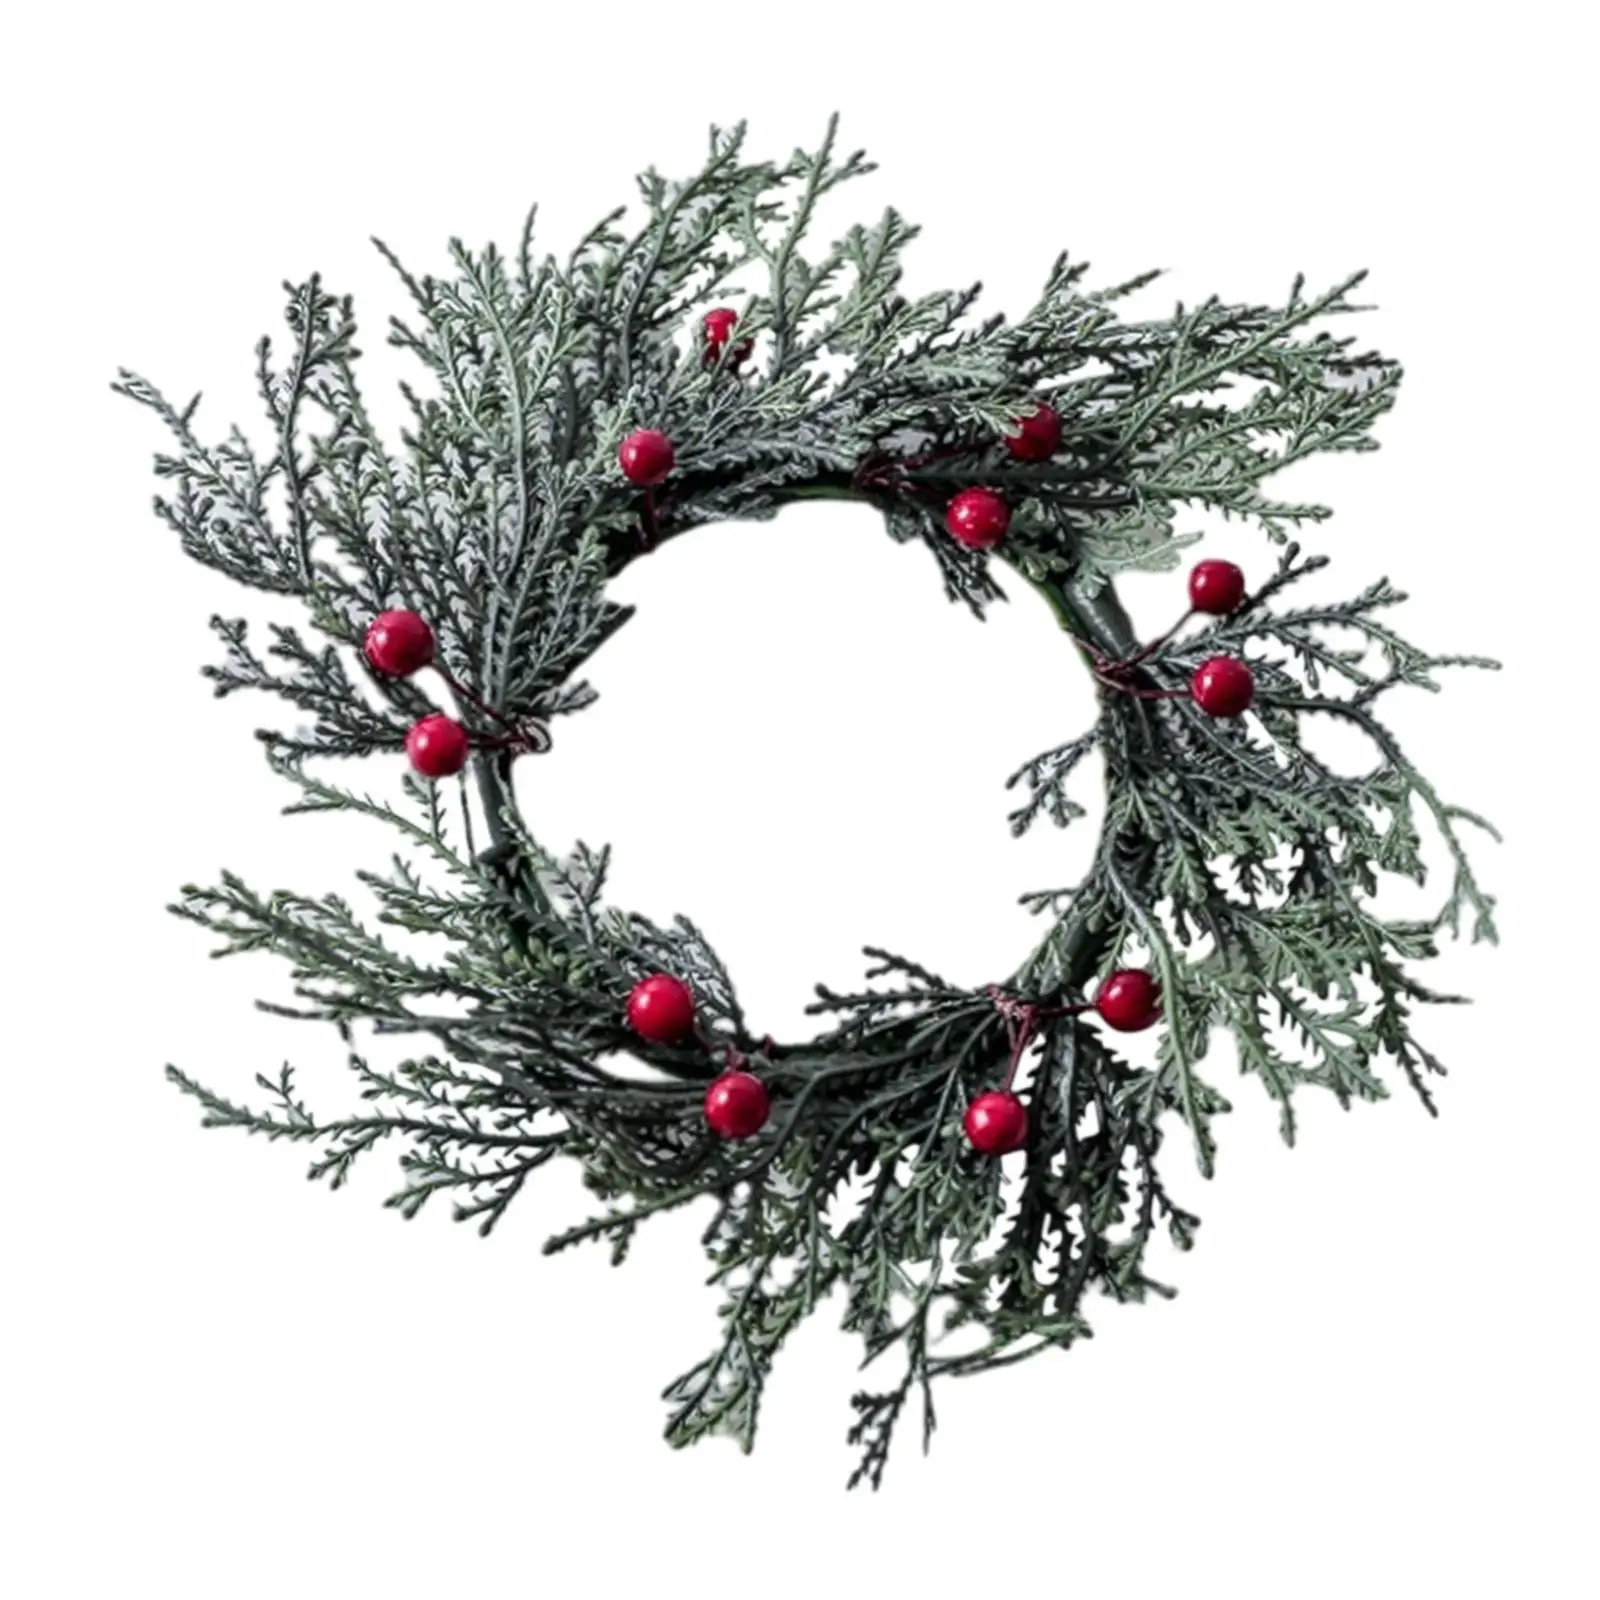 Christmas Candle Ring 8inch Artificial Wreath Christmas Garland Ornament for Pillars Farmhouse Holiday Party Home Table Decor